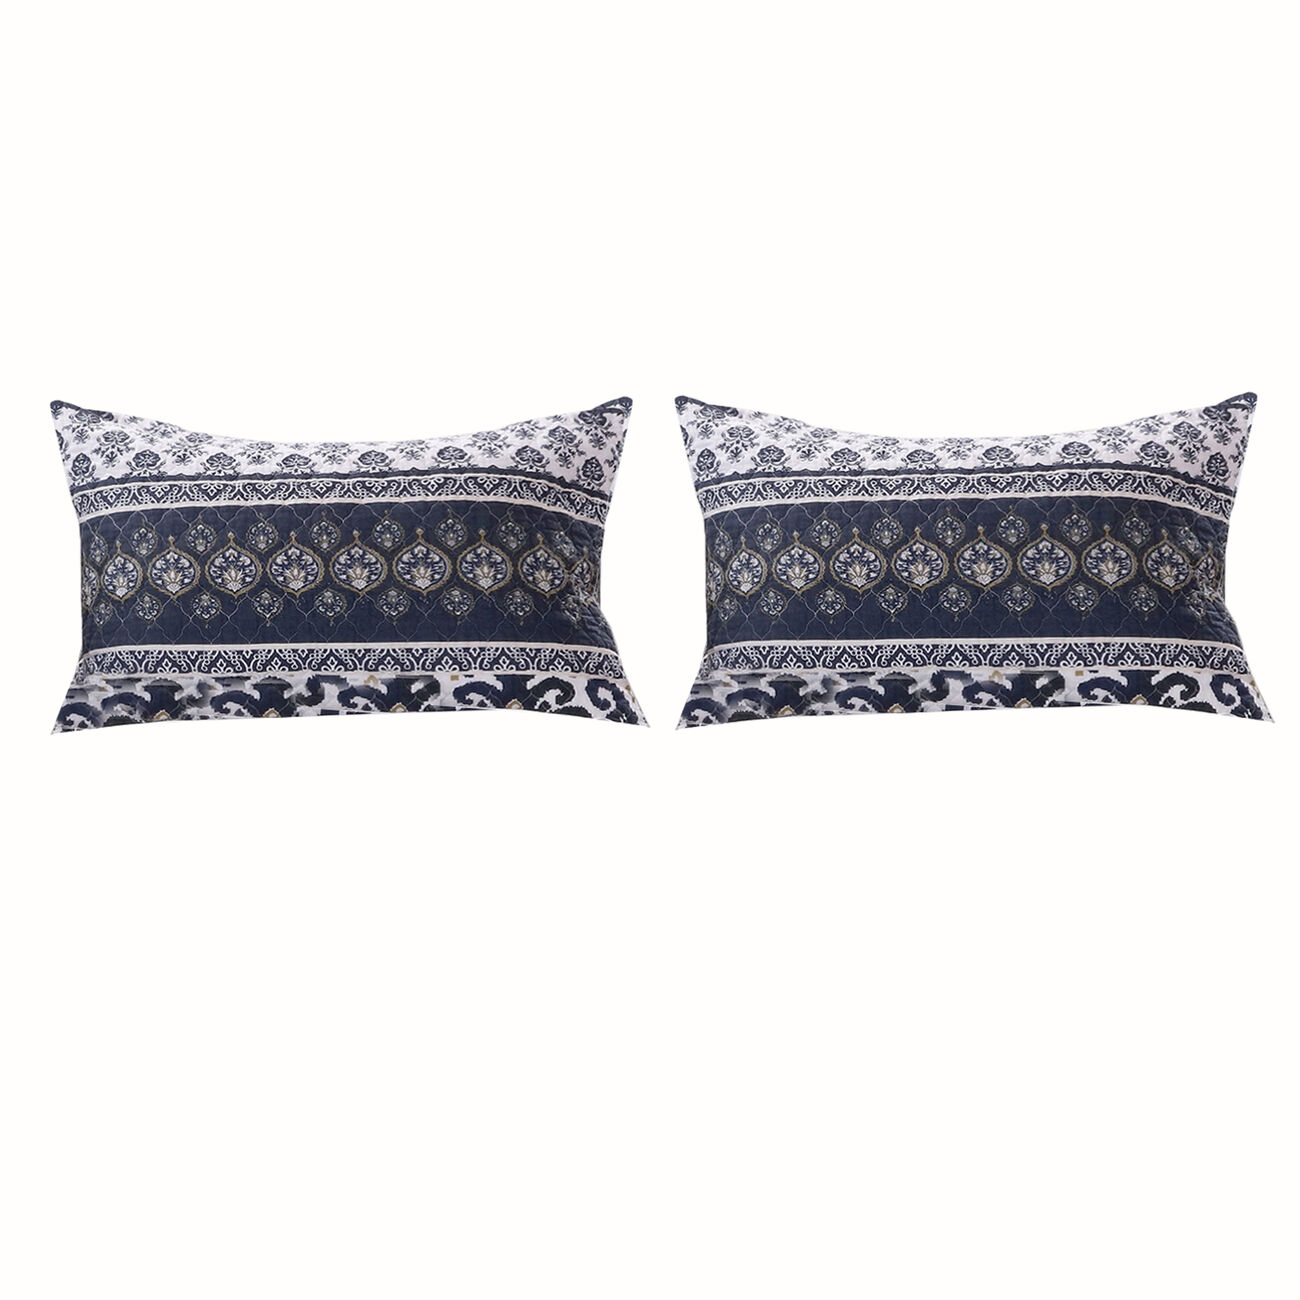 36 x 20 Fabric King Pillow Sham with Ikat and Floral Motif, White and Blue - BM223392